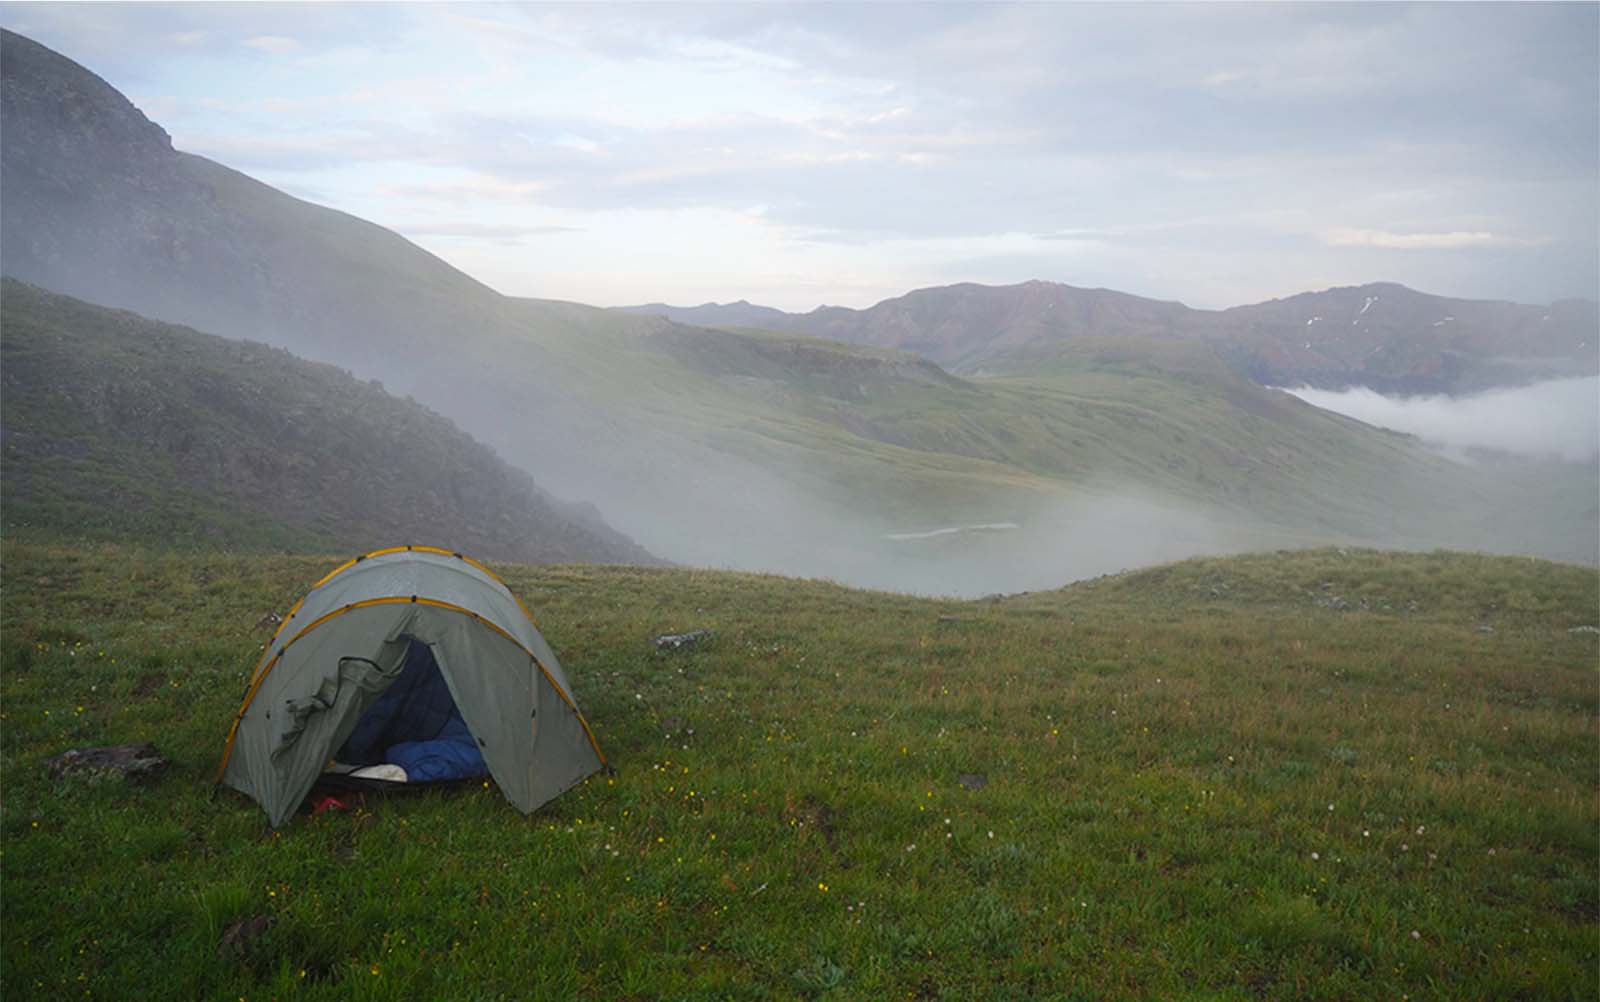 A tent in front of a misty mountainscape